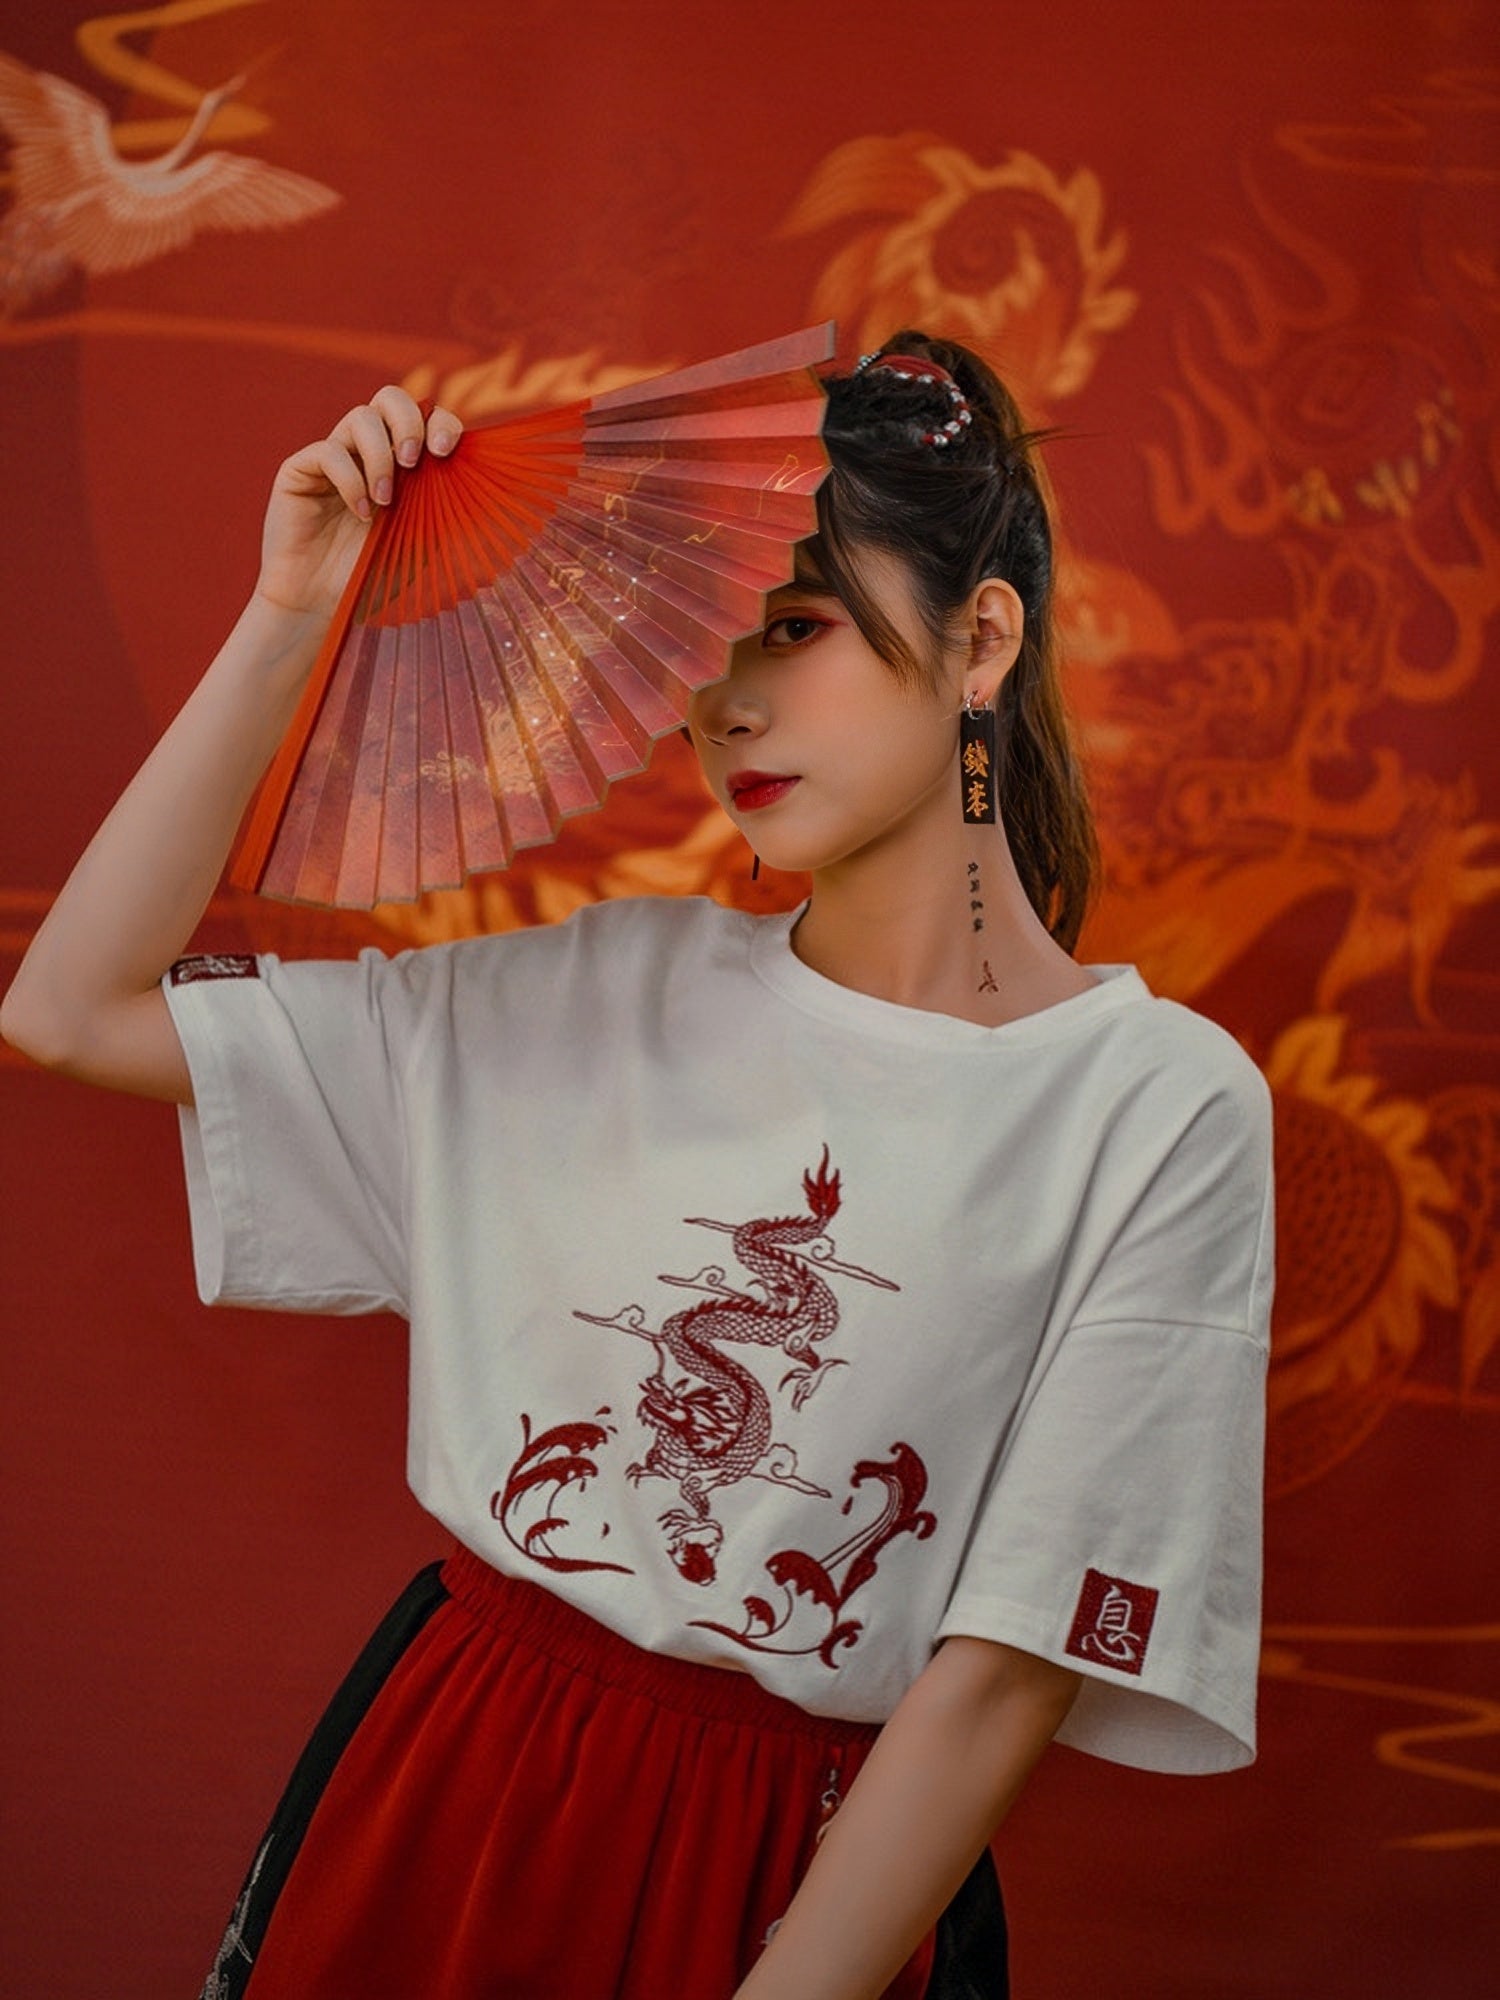 Golden Dragon Chinese Unisex Tees-ntbhshop